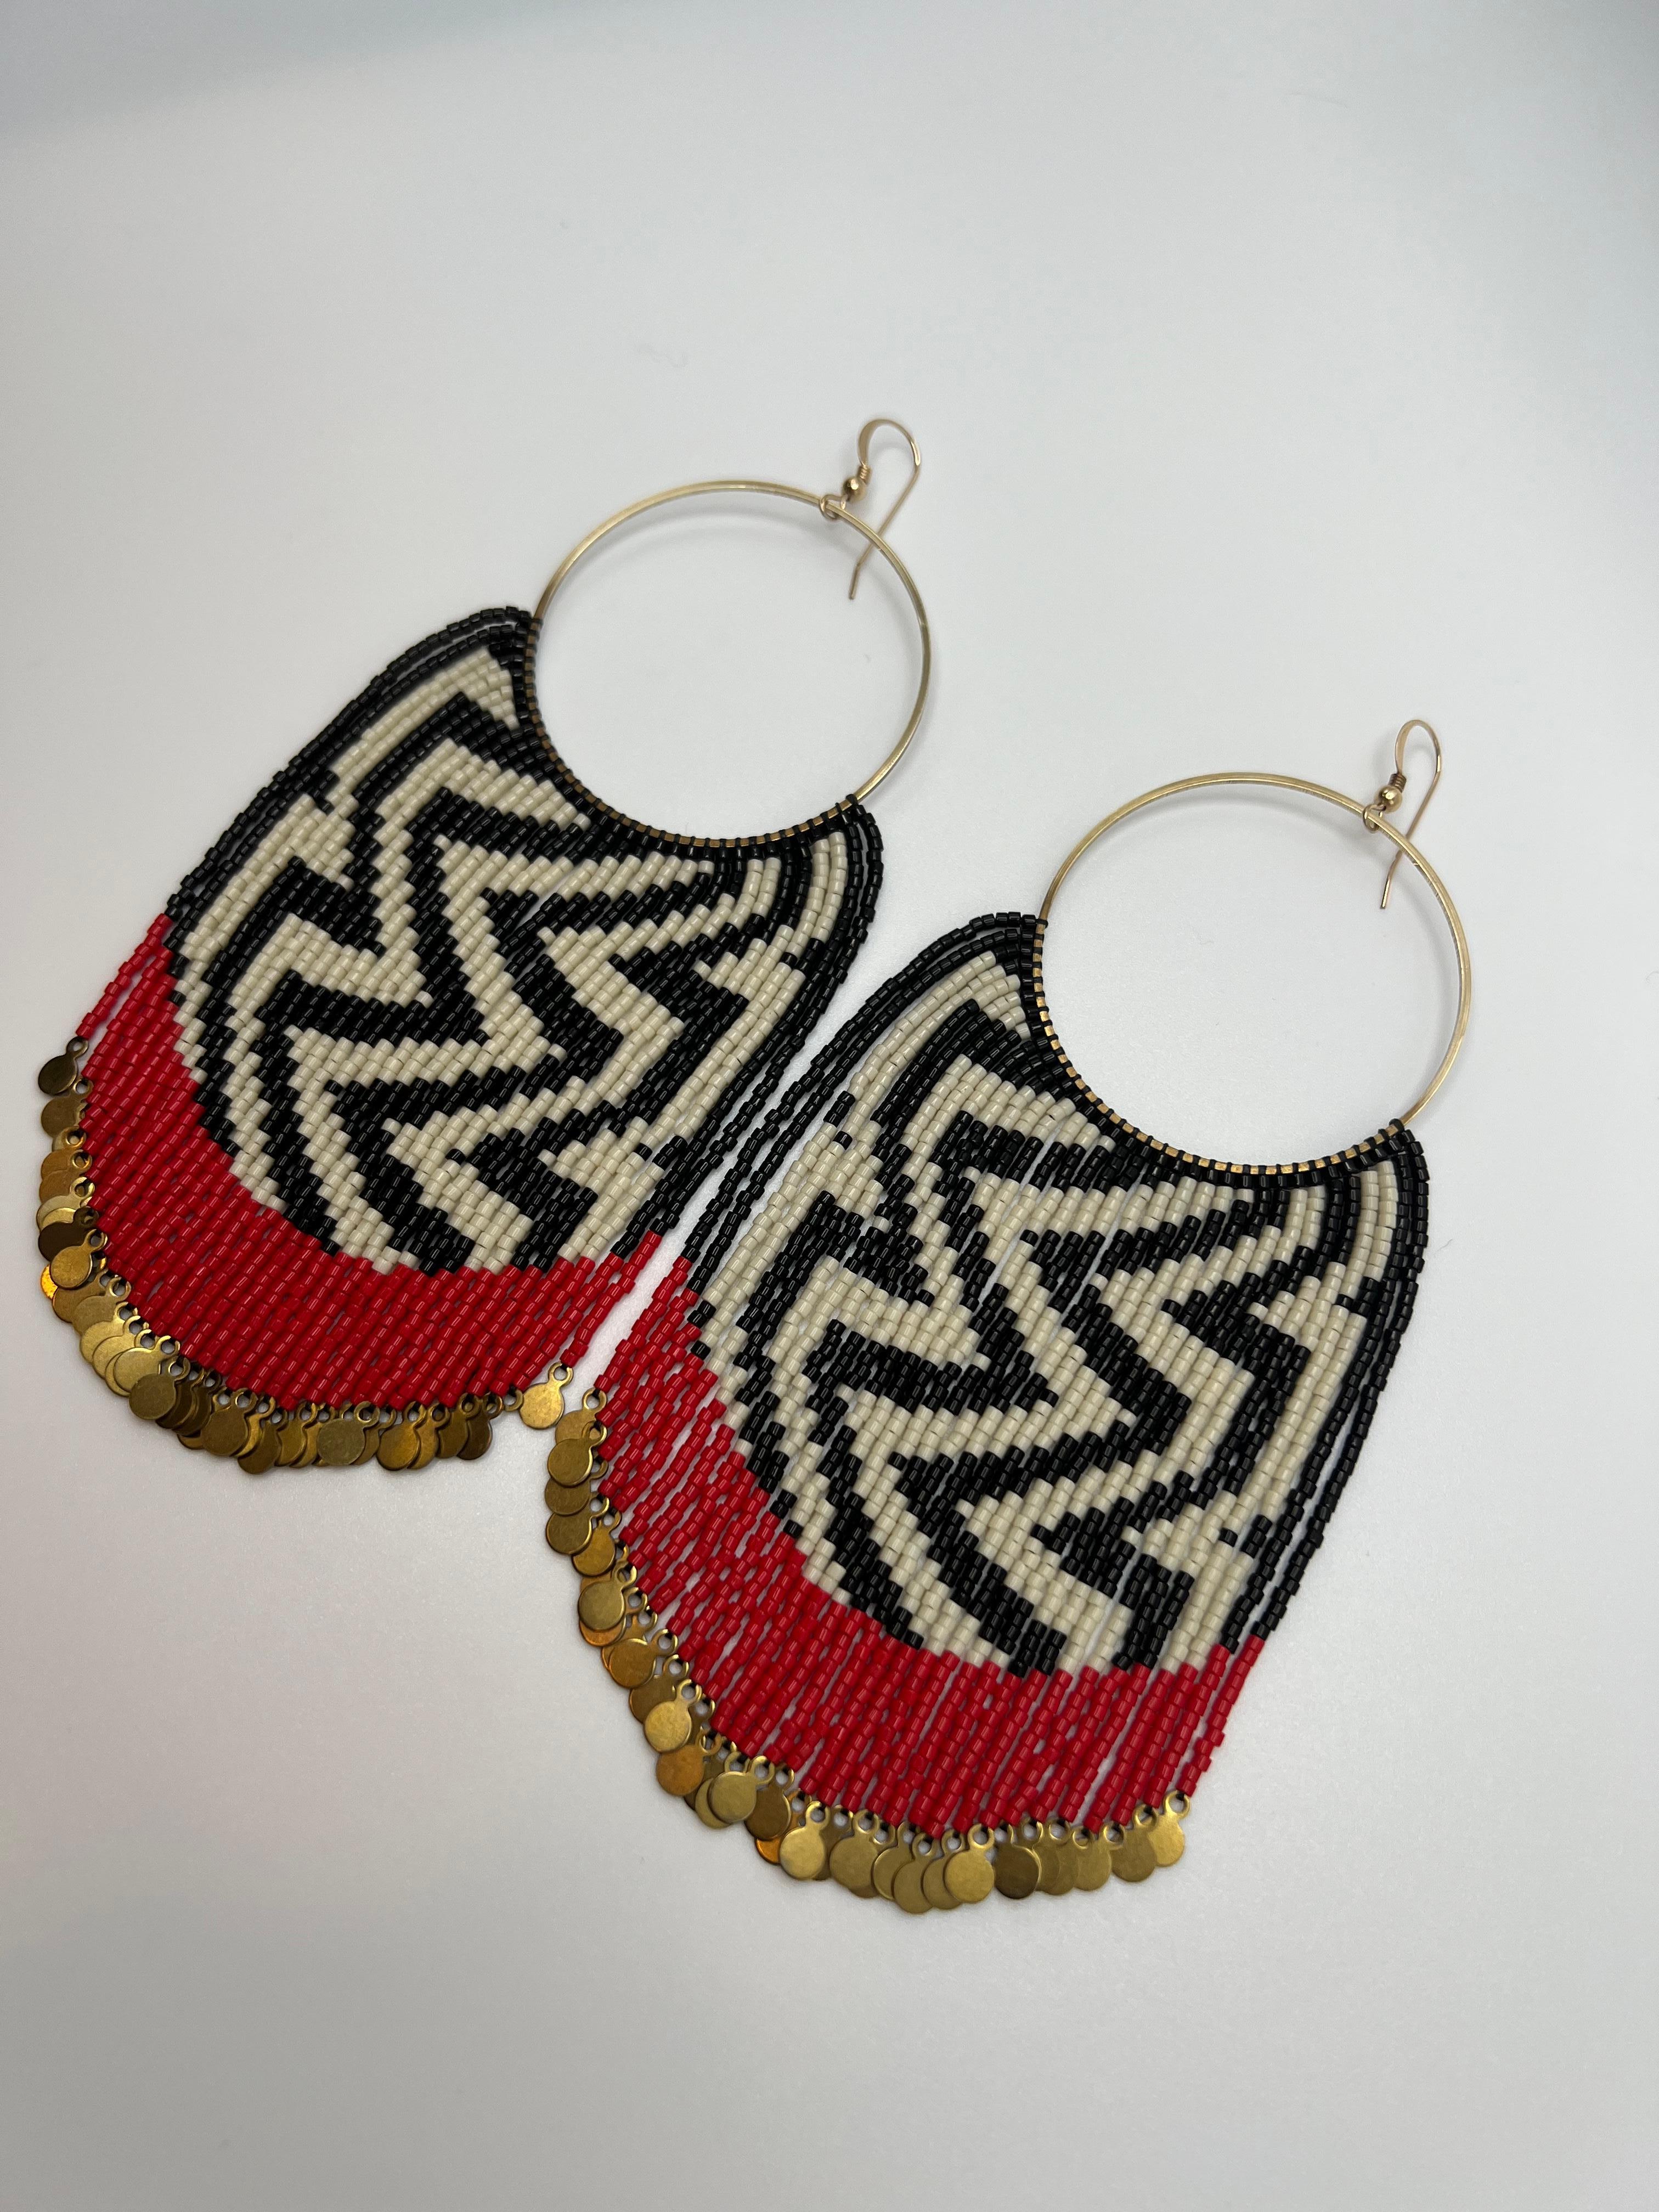 These earrings feature the Raven’s Tail weaving pattern ‘All my Ancestors’. Raven’s Tail is an ancient form of textile weaving practiced by the Indigenous Peoples of the Northwest coast of North America. Once an extinct art Raven’s Tail has seen a